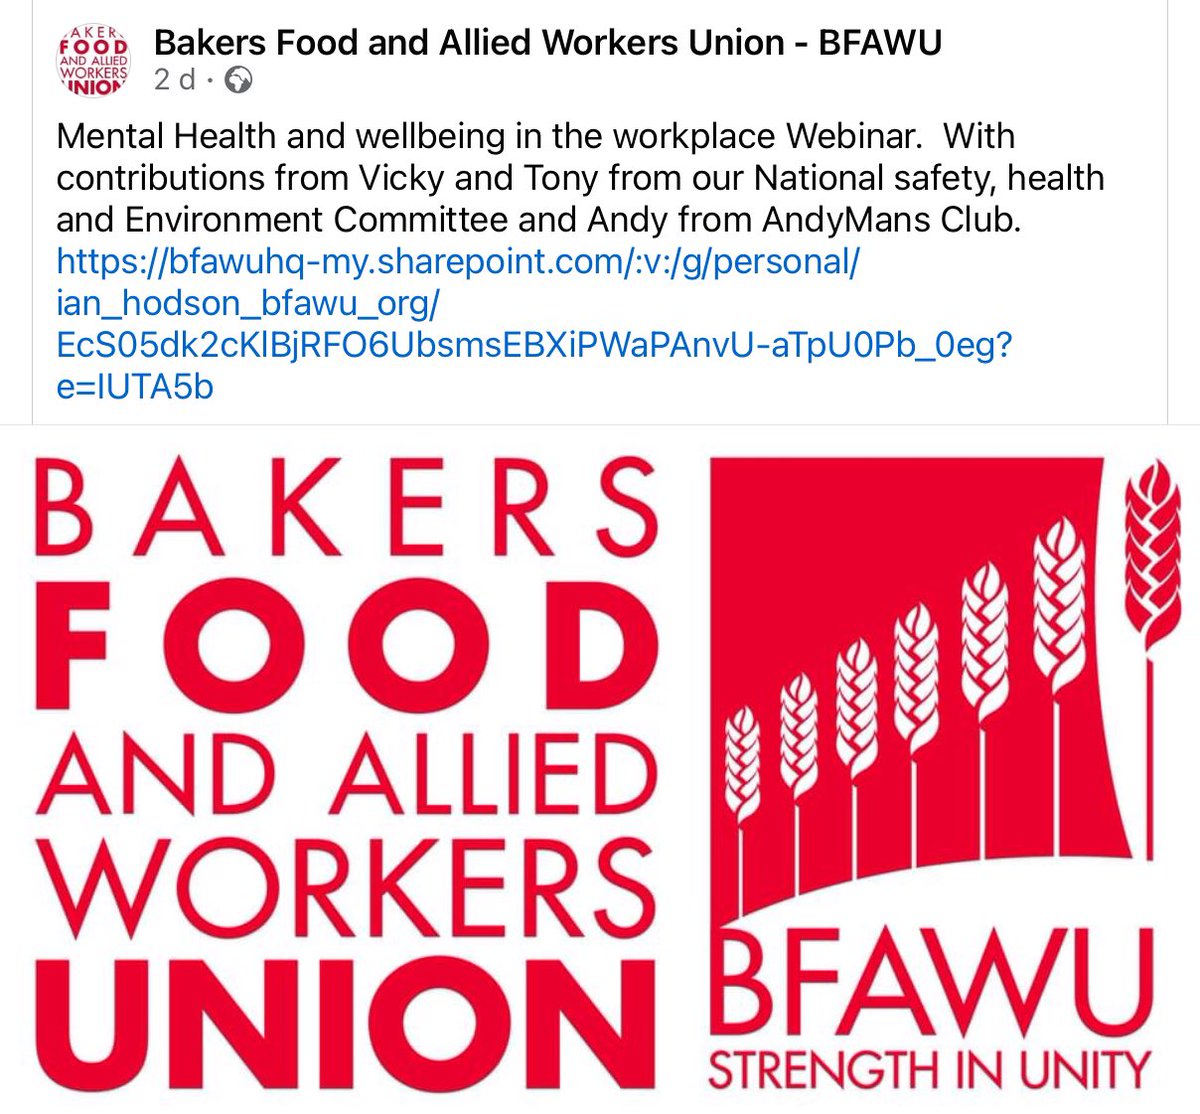 In light of both Tory & the party formerly known as Labour attacking the poor & disabled it’s perhaps not a great surprise that my union @BFAWUOfficial is leading the way in Mental Health wellbeing as our members are seeing the toll being taken by from wages cut in real terms